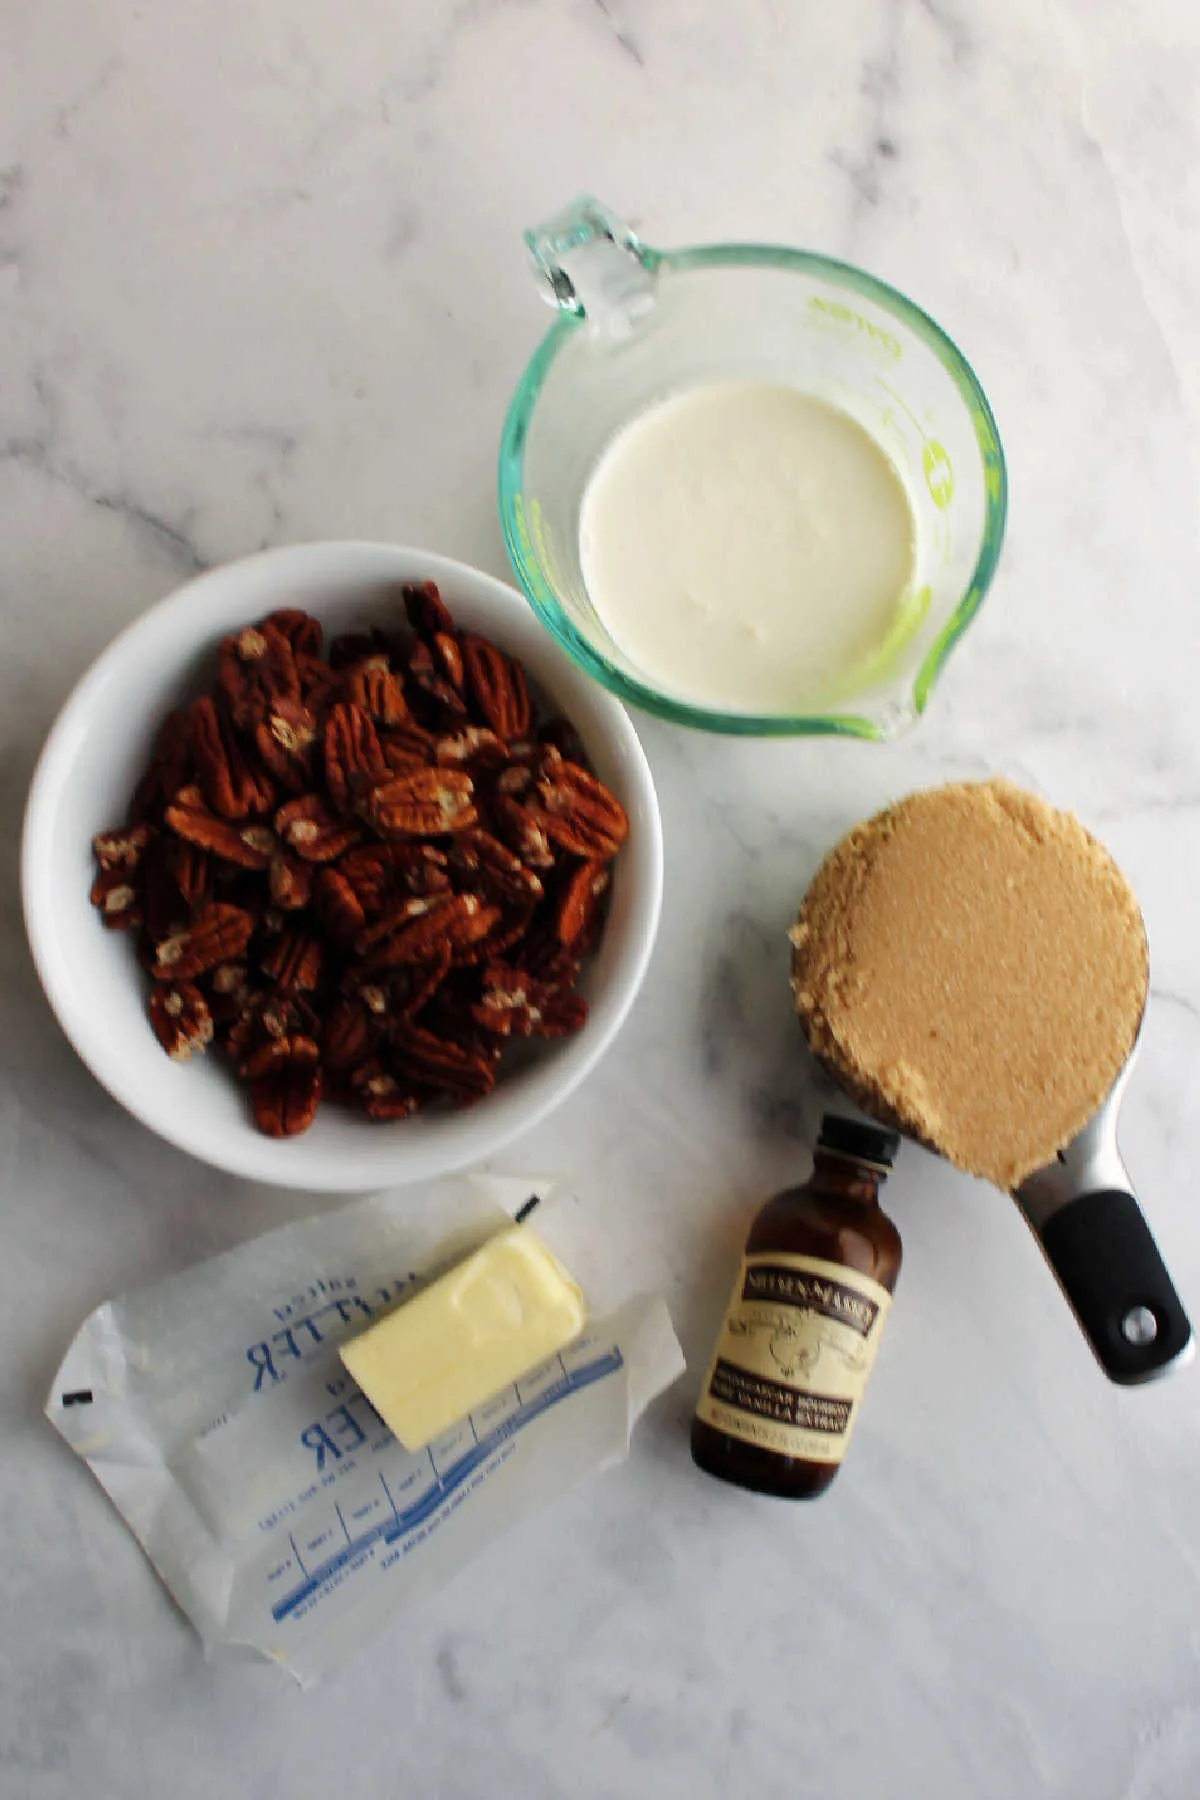 Ingredients for pecan pie swirl in cheesecake